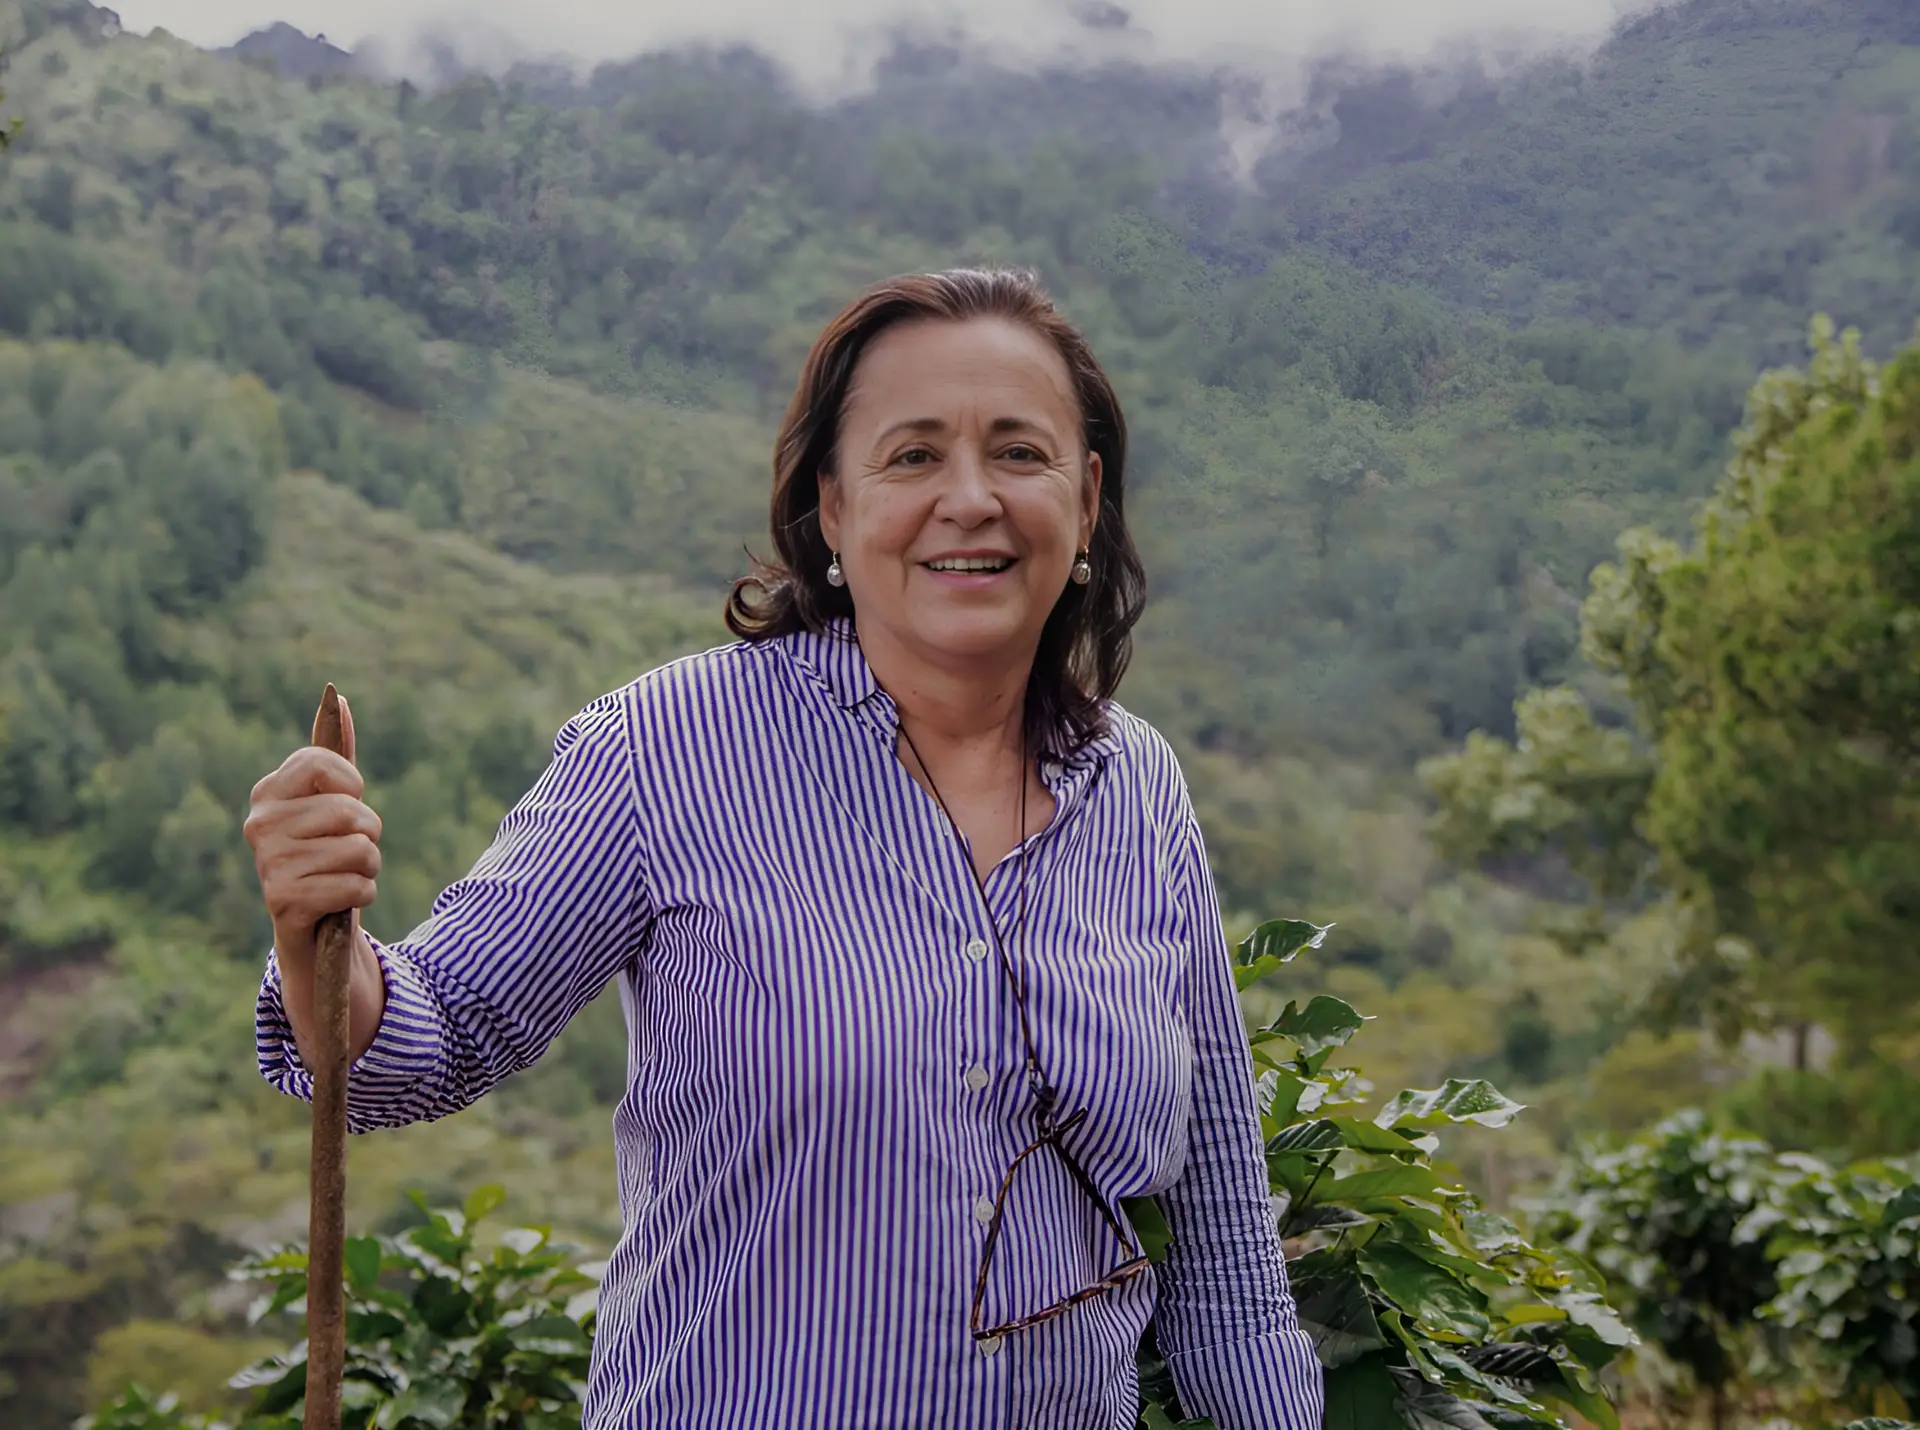 A photo of Ana Maria Albir with the mountains of Nicaragua in the background